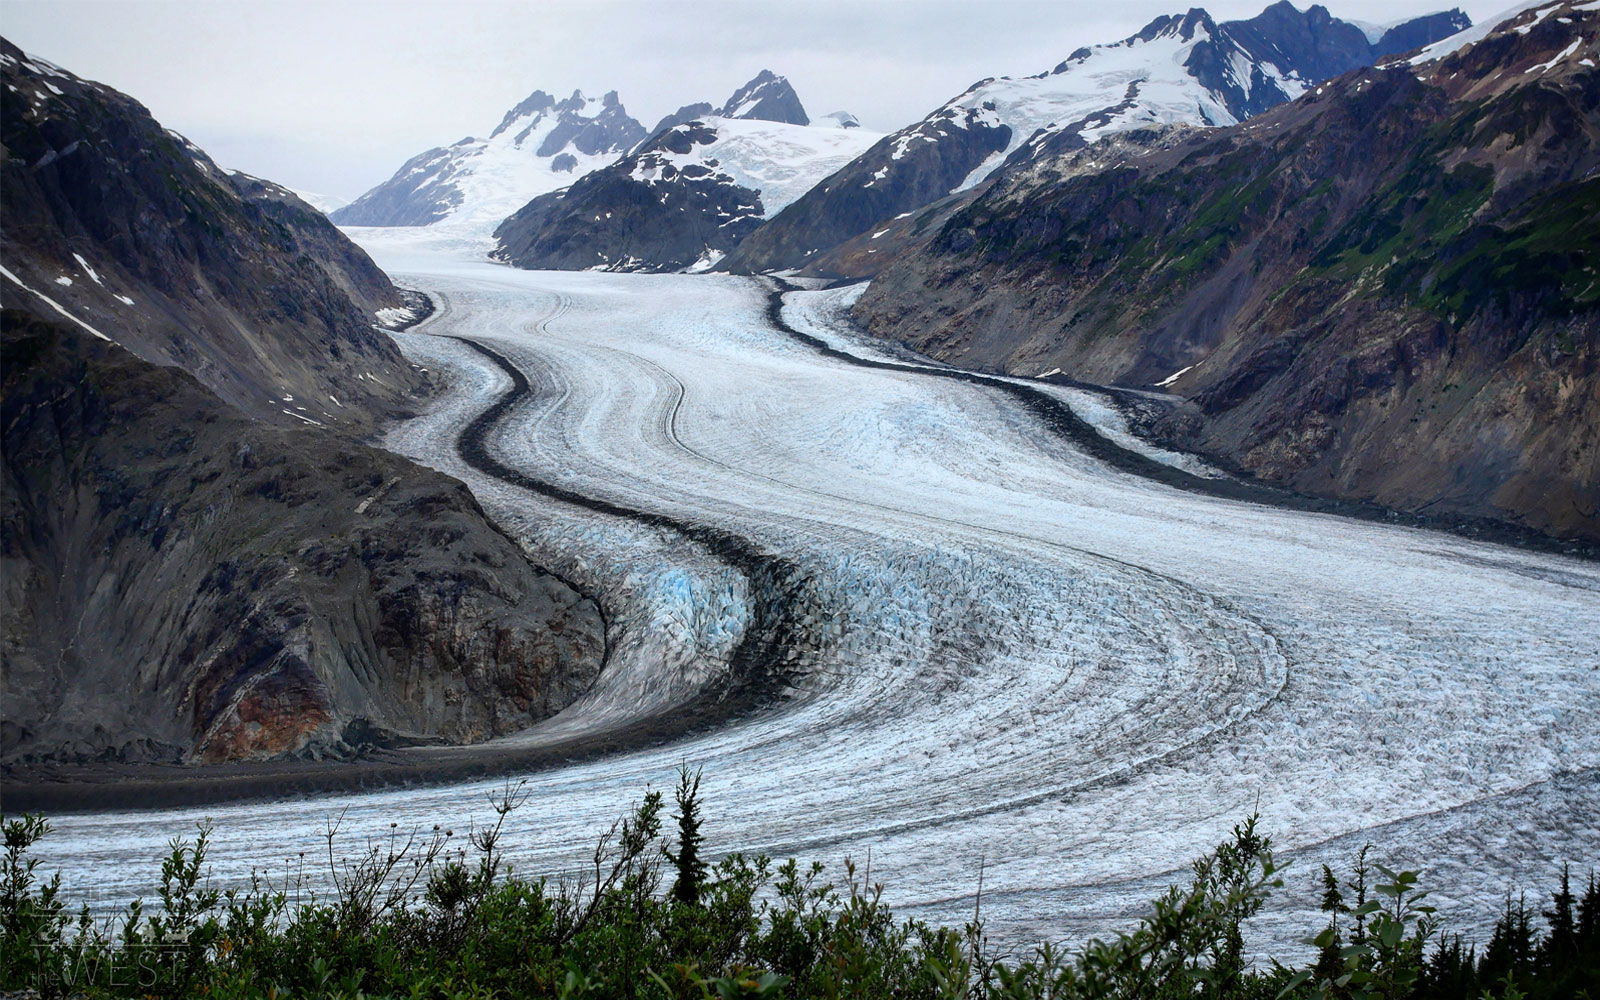 In western British Columbia, the couple explored massive glaciers like Salmon Glacier, Canada's fifth largest glacier and the world's largest glacier accessible by road.
                              Thanks to its massive scale, those who visit the glacier, which sits north of both Stewart in British Columbia and Hyder, Alaska on the Canada-U.S. border, are rewarded with a striking view.
                              “When you get to the end of the road, you look down and there’s a massive glacier ahead of you, but the scale of it is so huge that you don’t even realize the crevices on it until you start to look closer,” Paquette said.